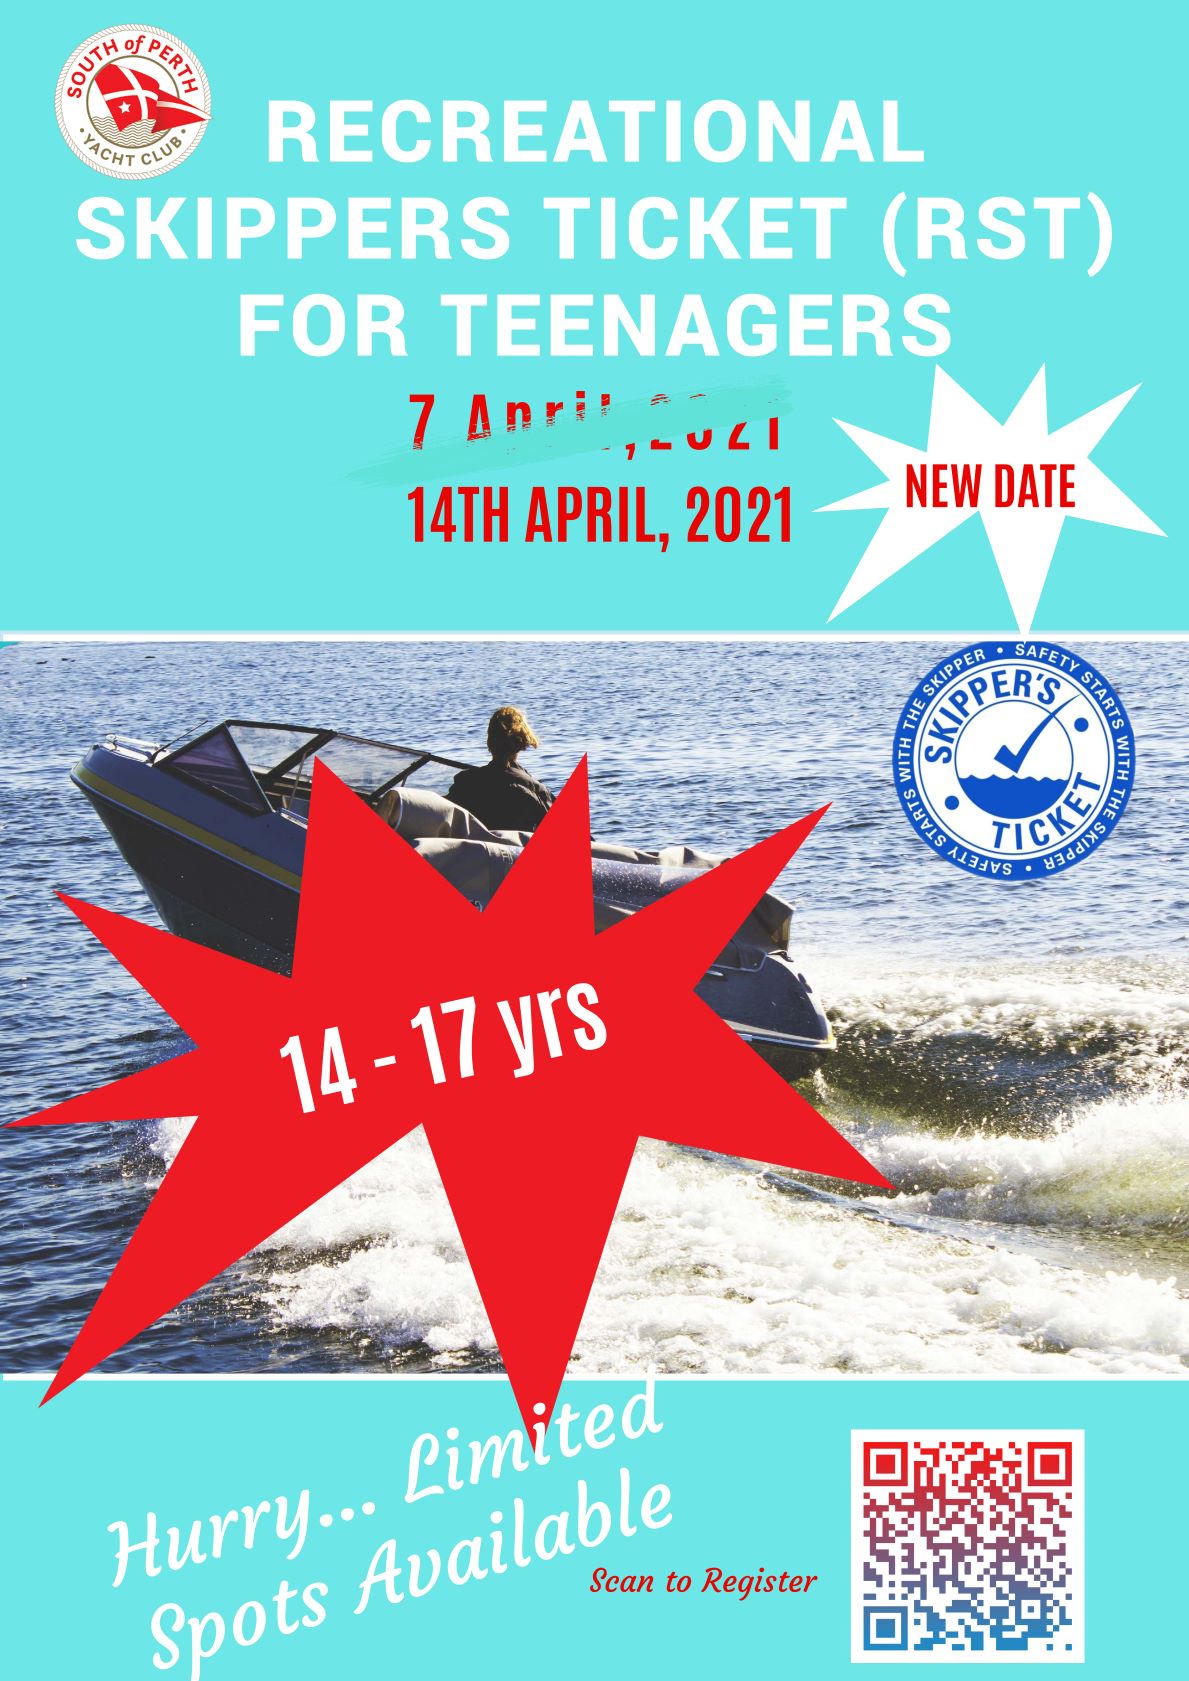 Recreational Skippers Ticket (RST) for teenagers